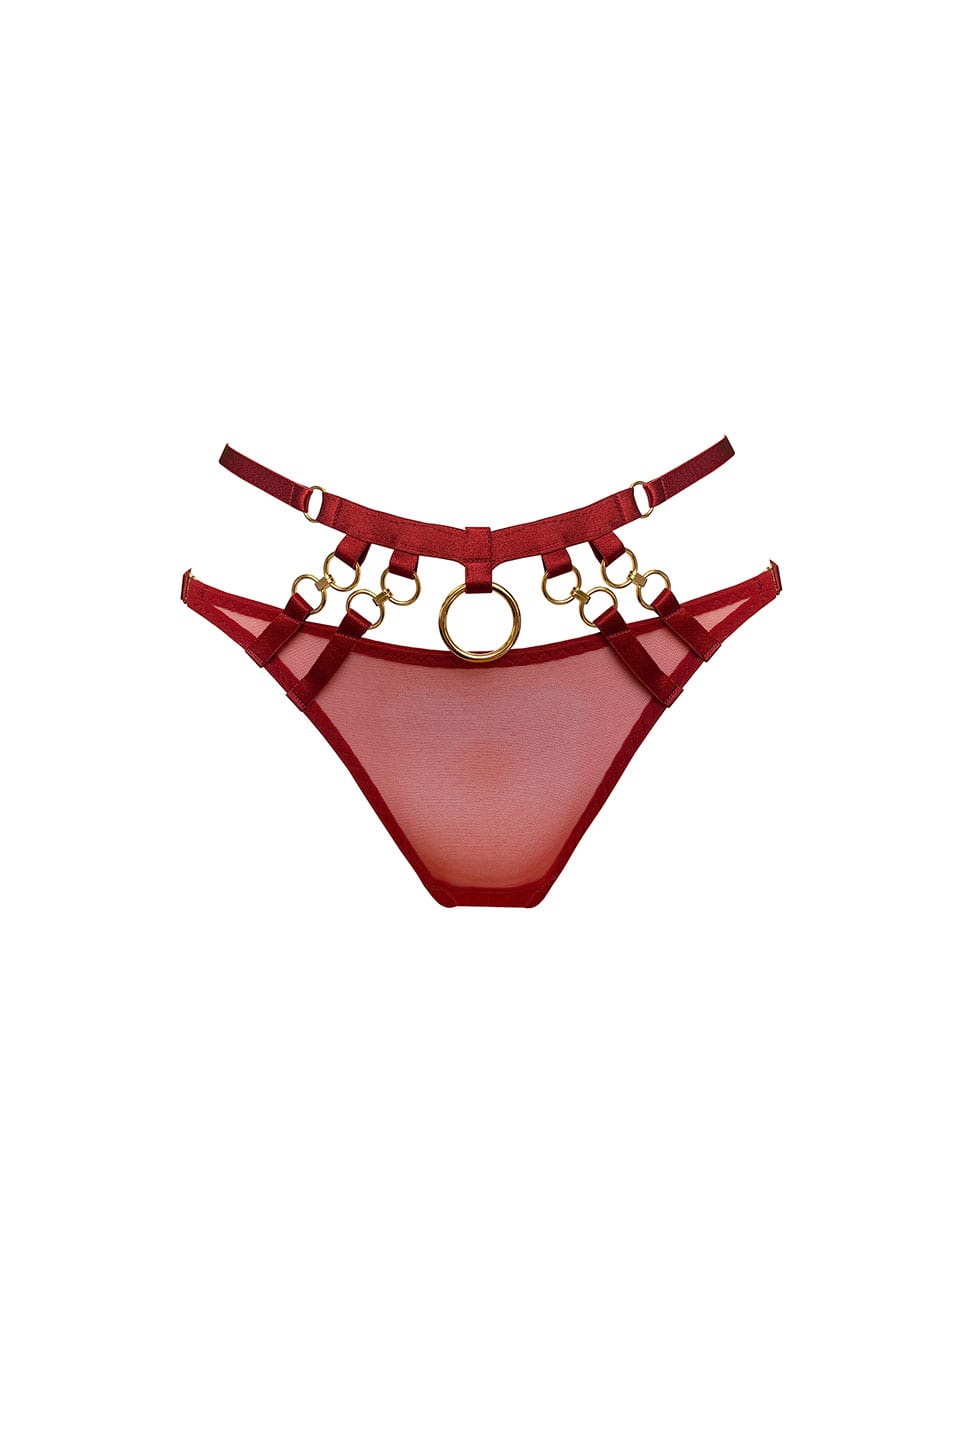 Atelier Bordelle Kleio Open Back Brief Burnt Red Front. Product gallery 1